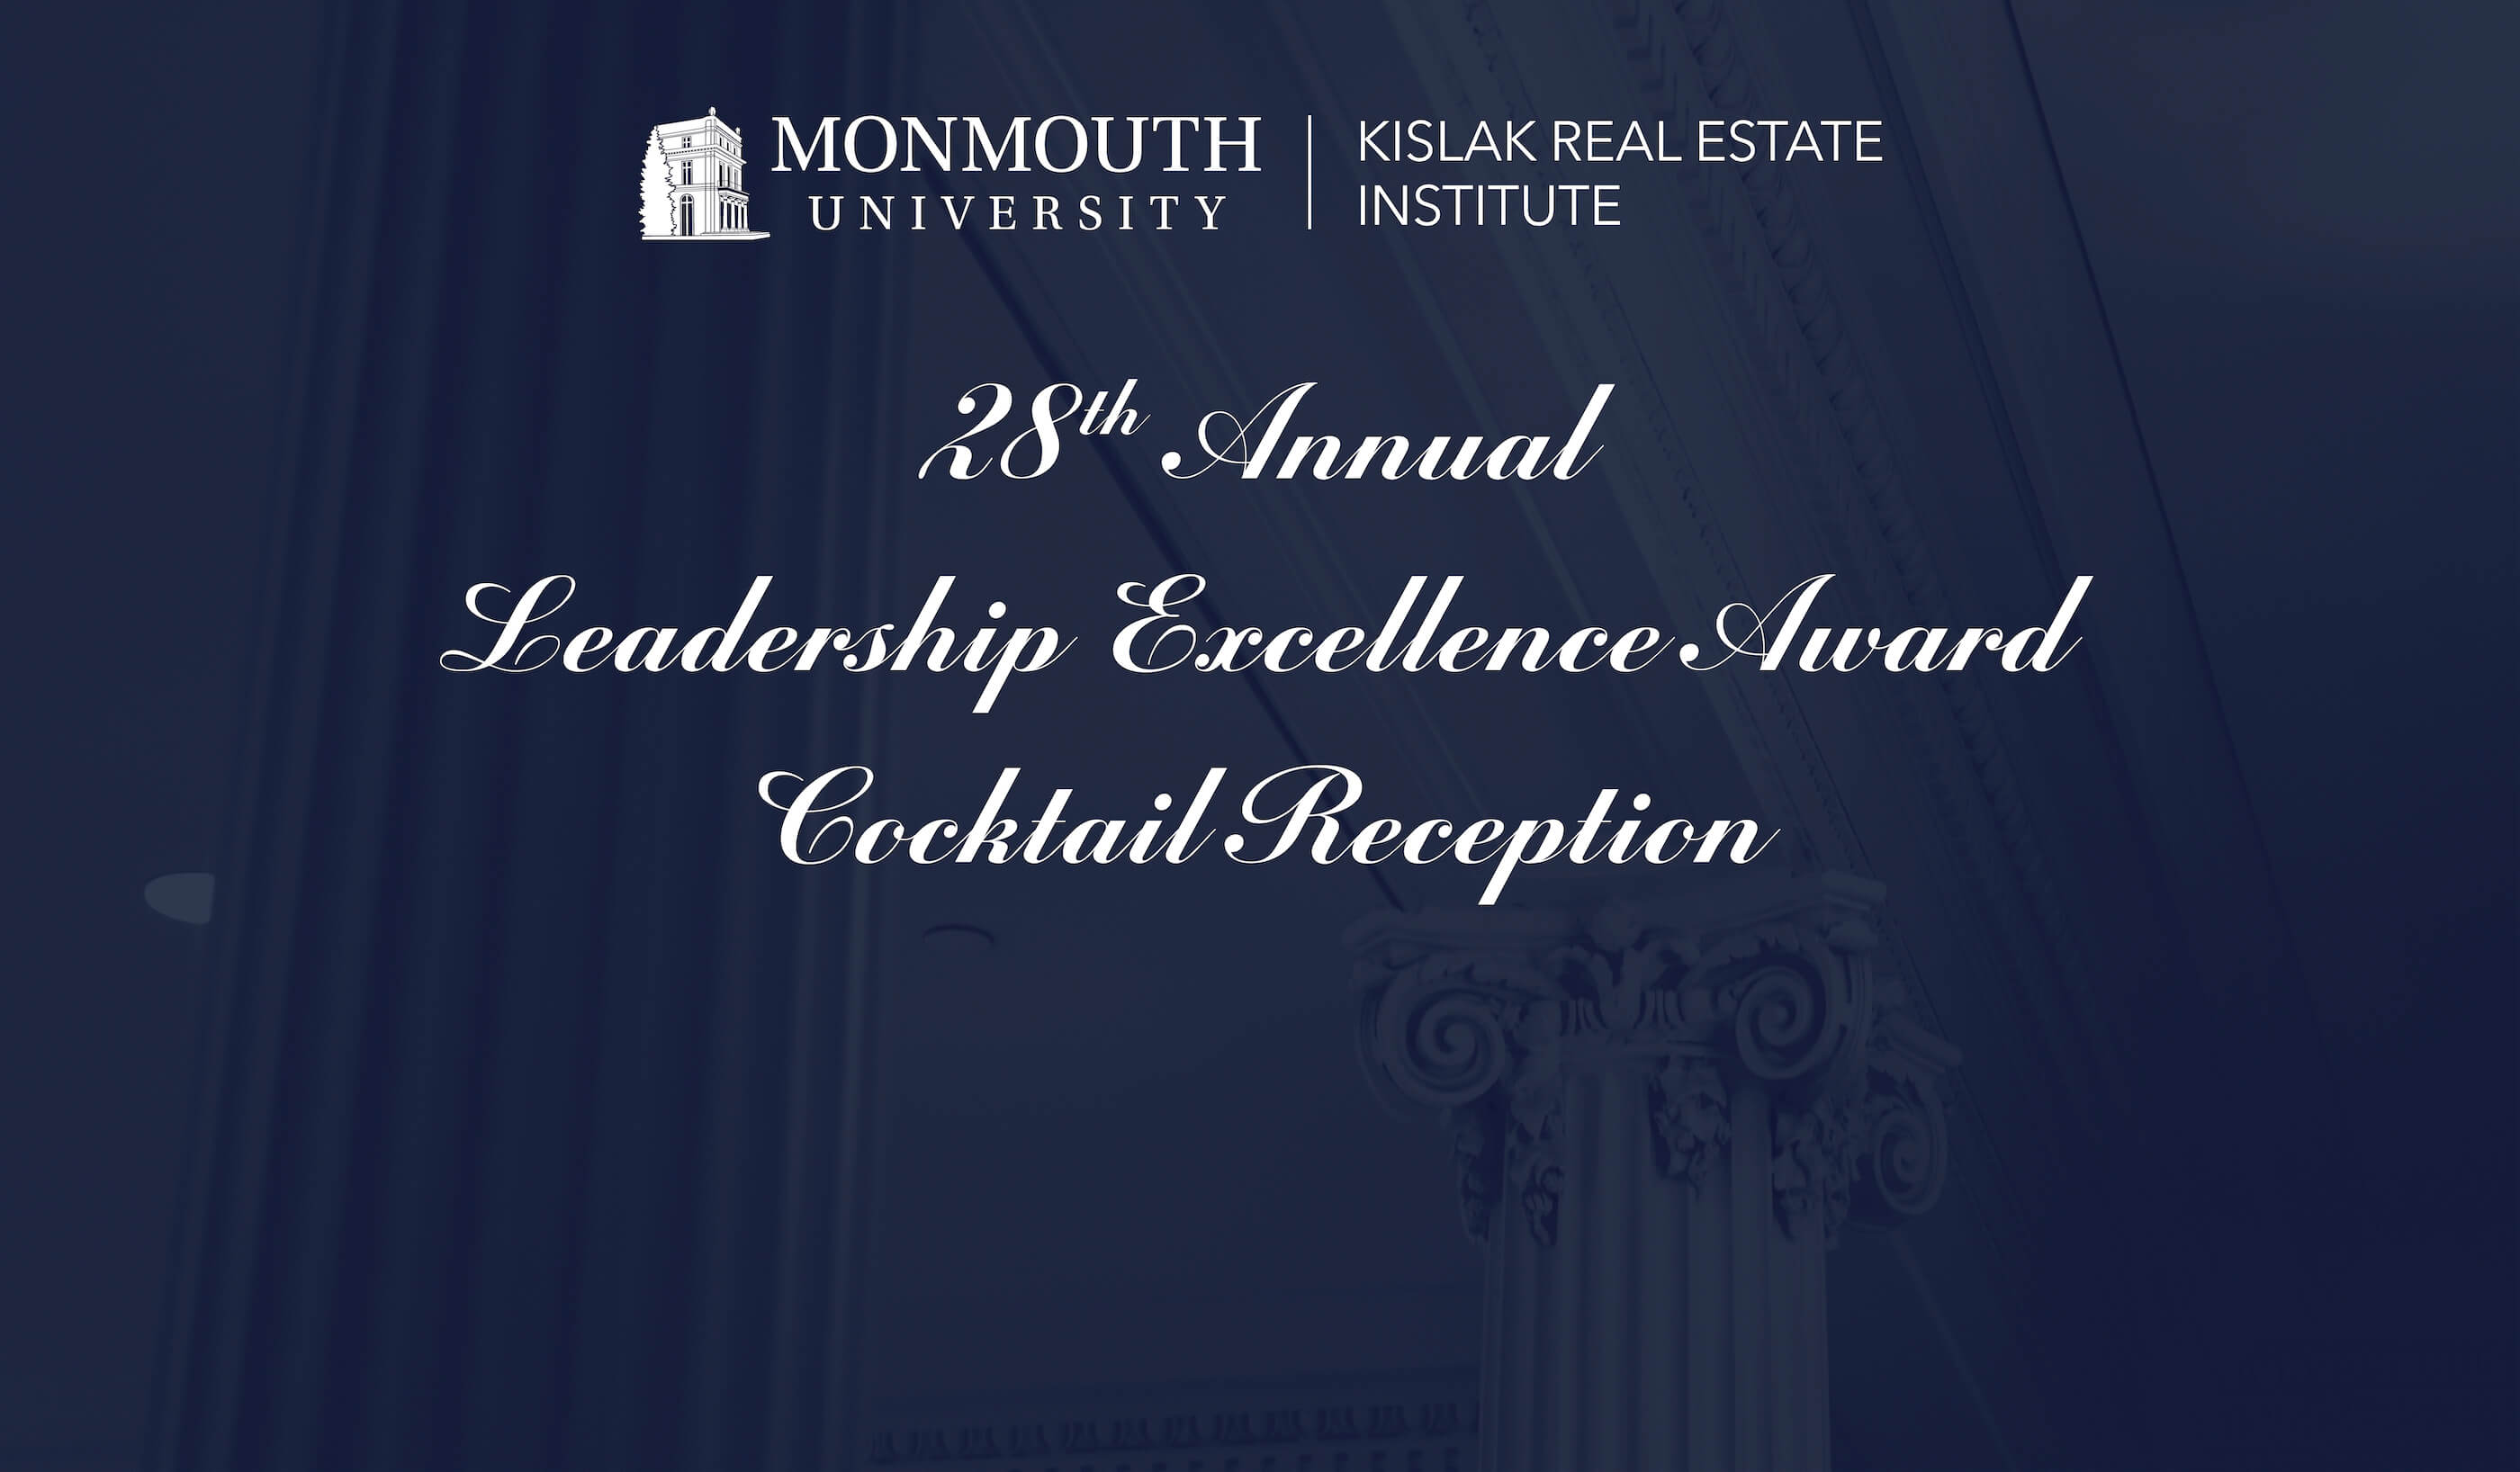 Monmouth University Kislak Real Estate Institute 28th Annual Leadership Excellence Award Cocktail Reception